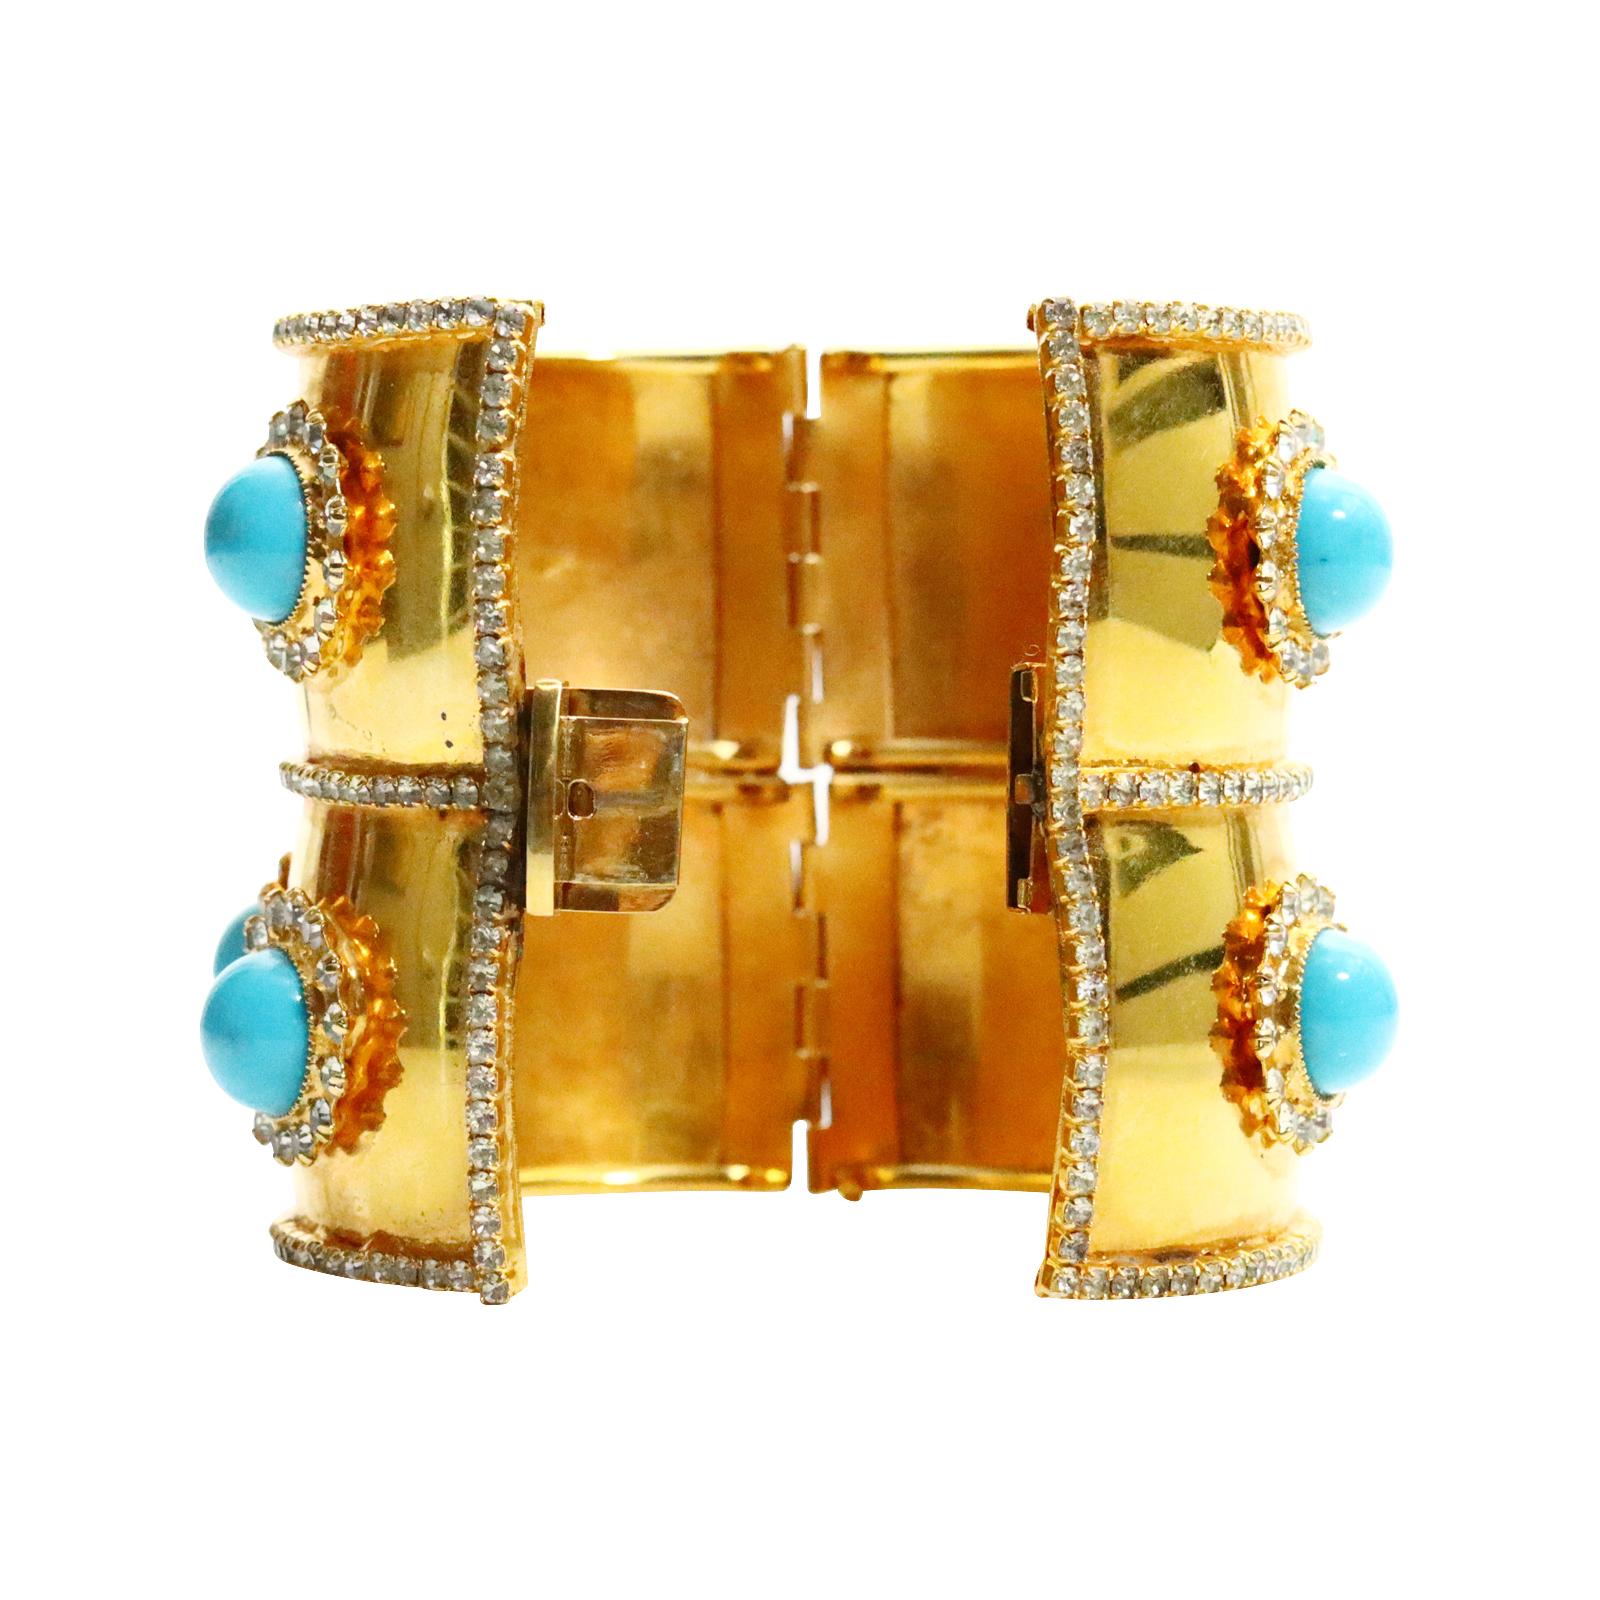 Vintage deLillo Gold Tone Crystal with Faux Turquoise Bracelet Circa !970s For Sale 9